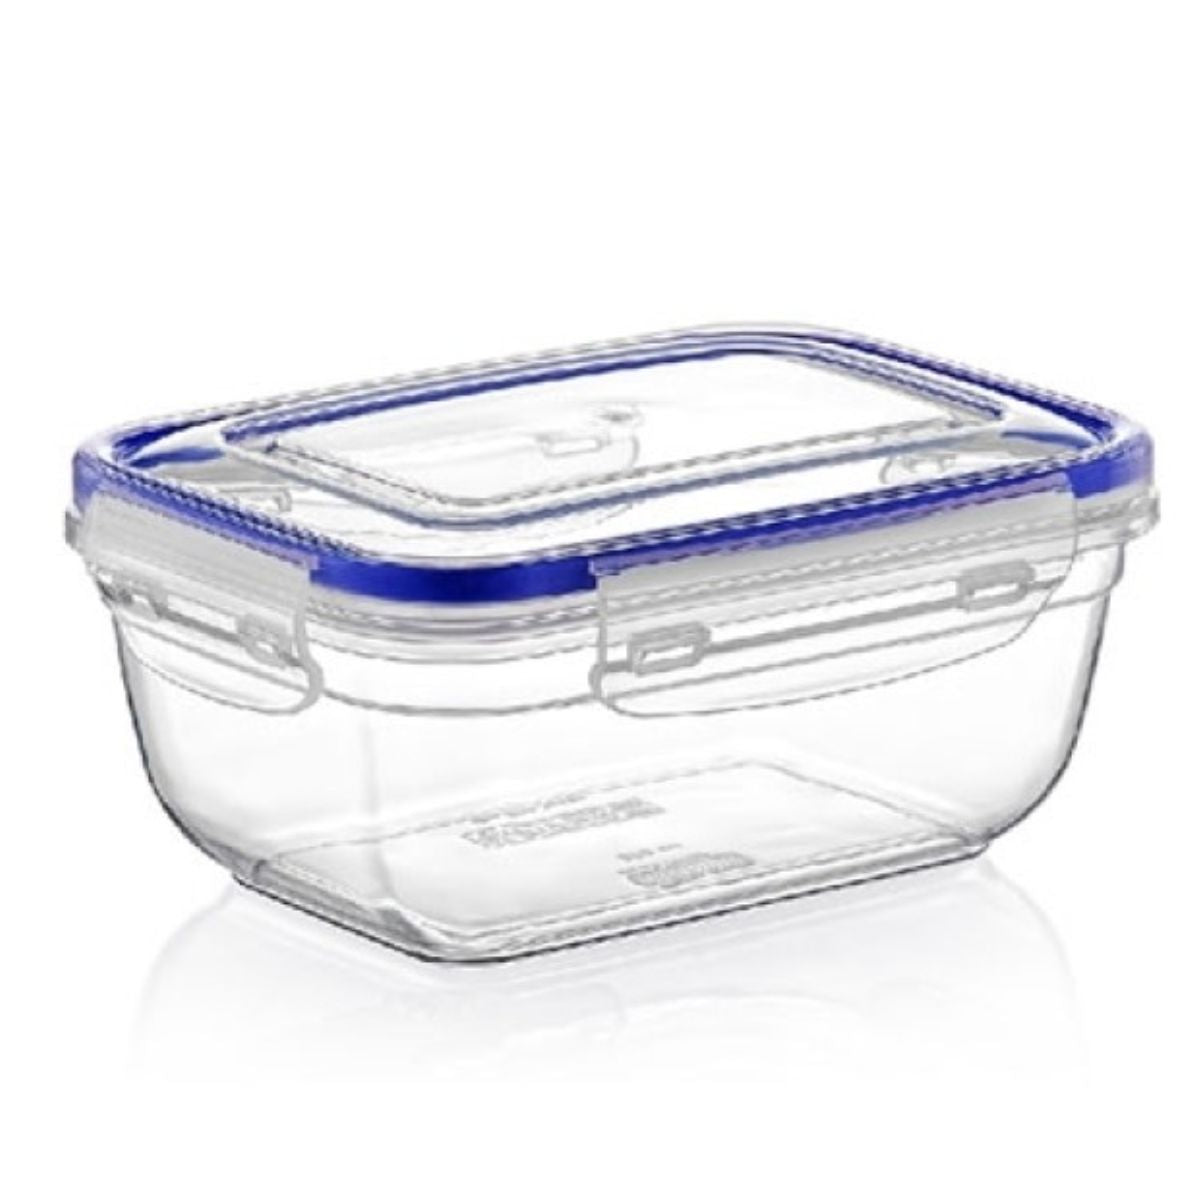 A Lock & Fresh - Seal Rectangle Storage - 400ml with blue lid on a white background.